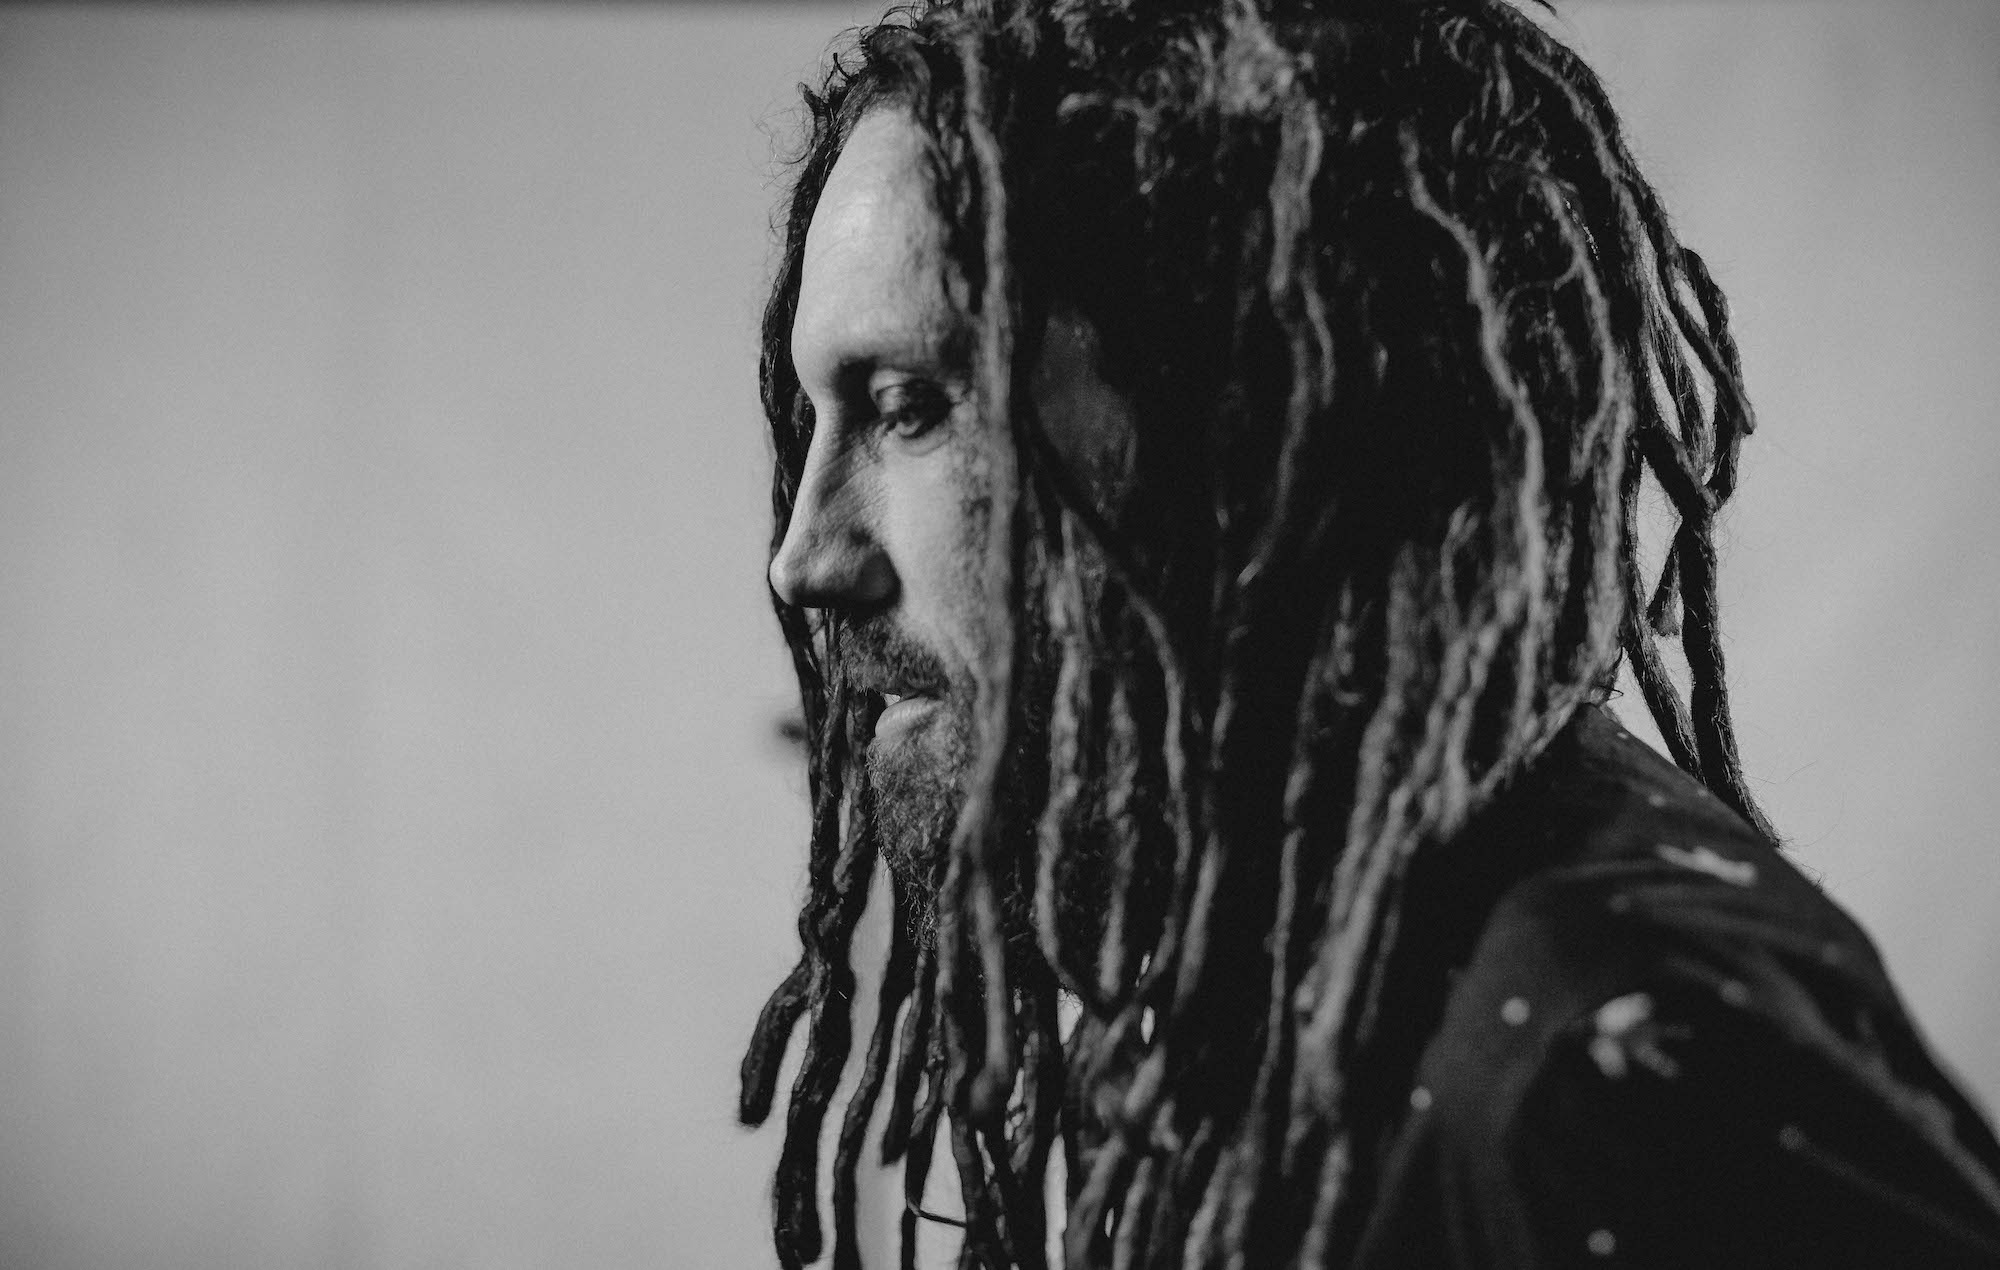 Five things we learned from our In Conversation video chat with Brian ‘Head’ Welch